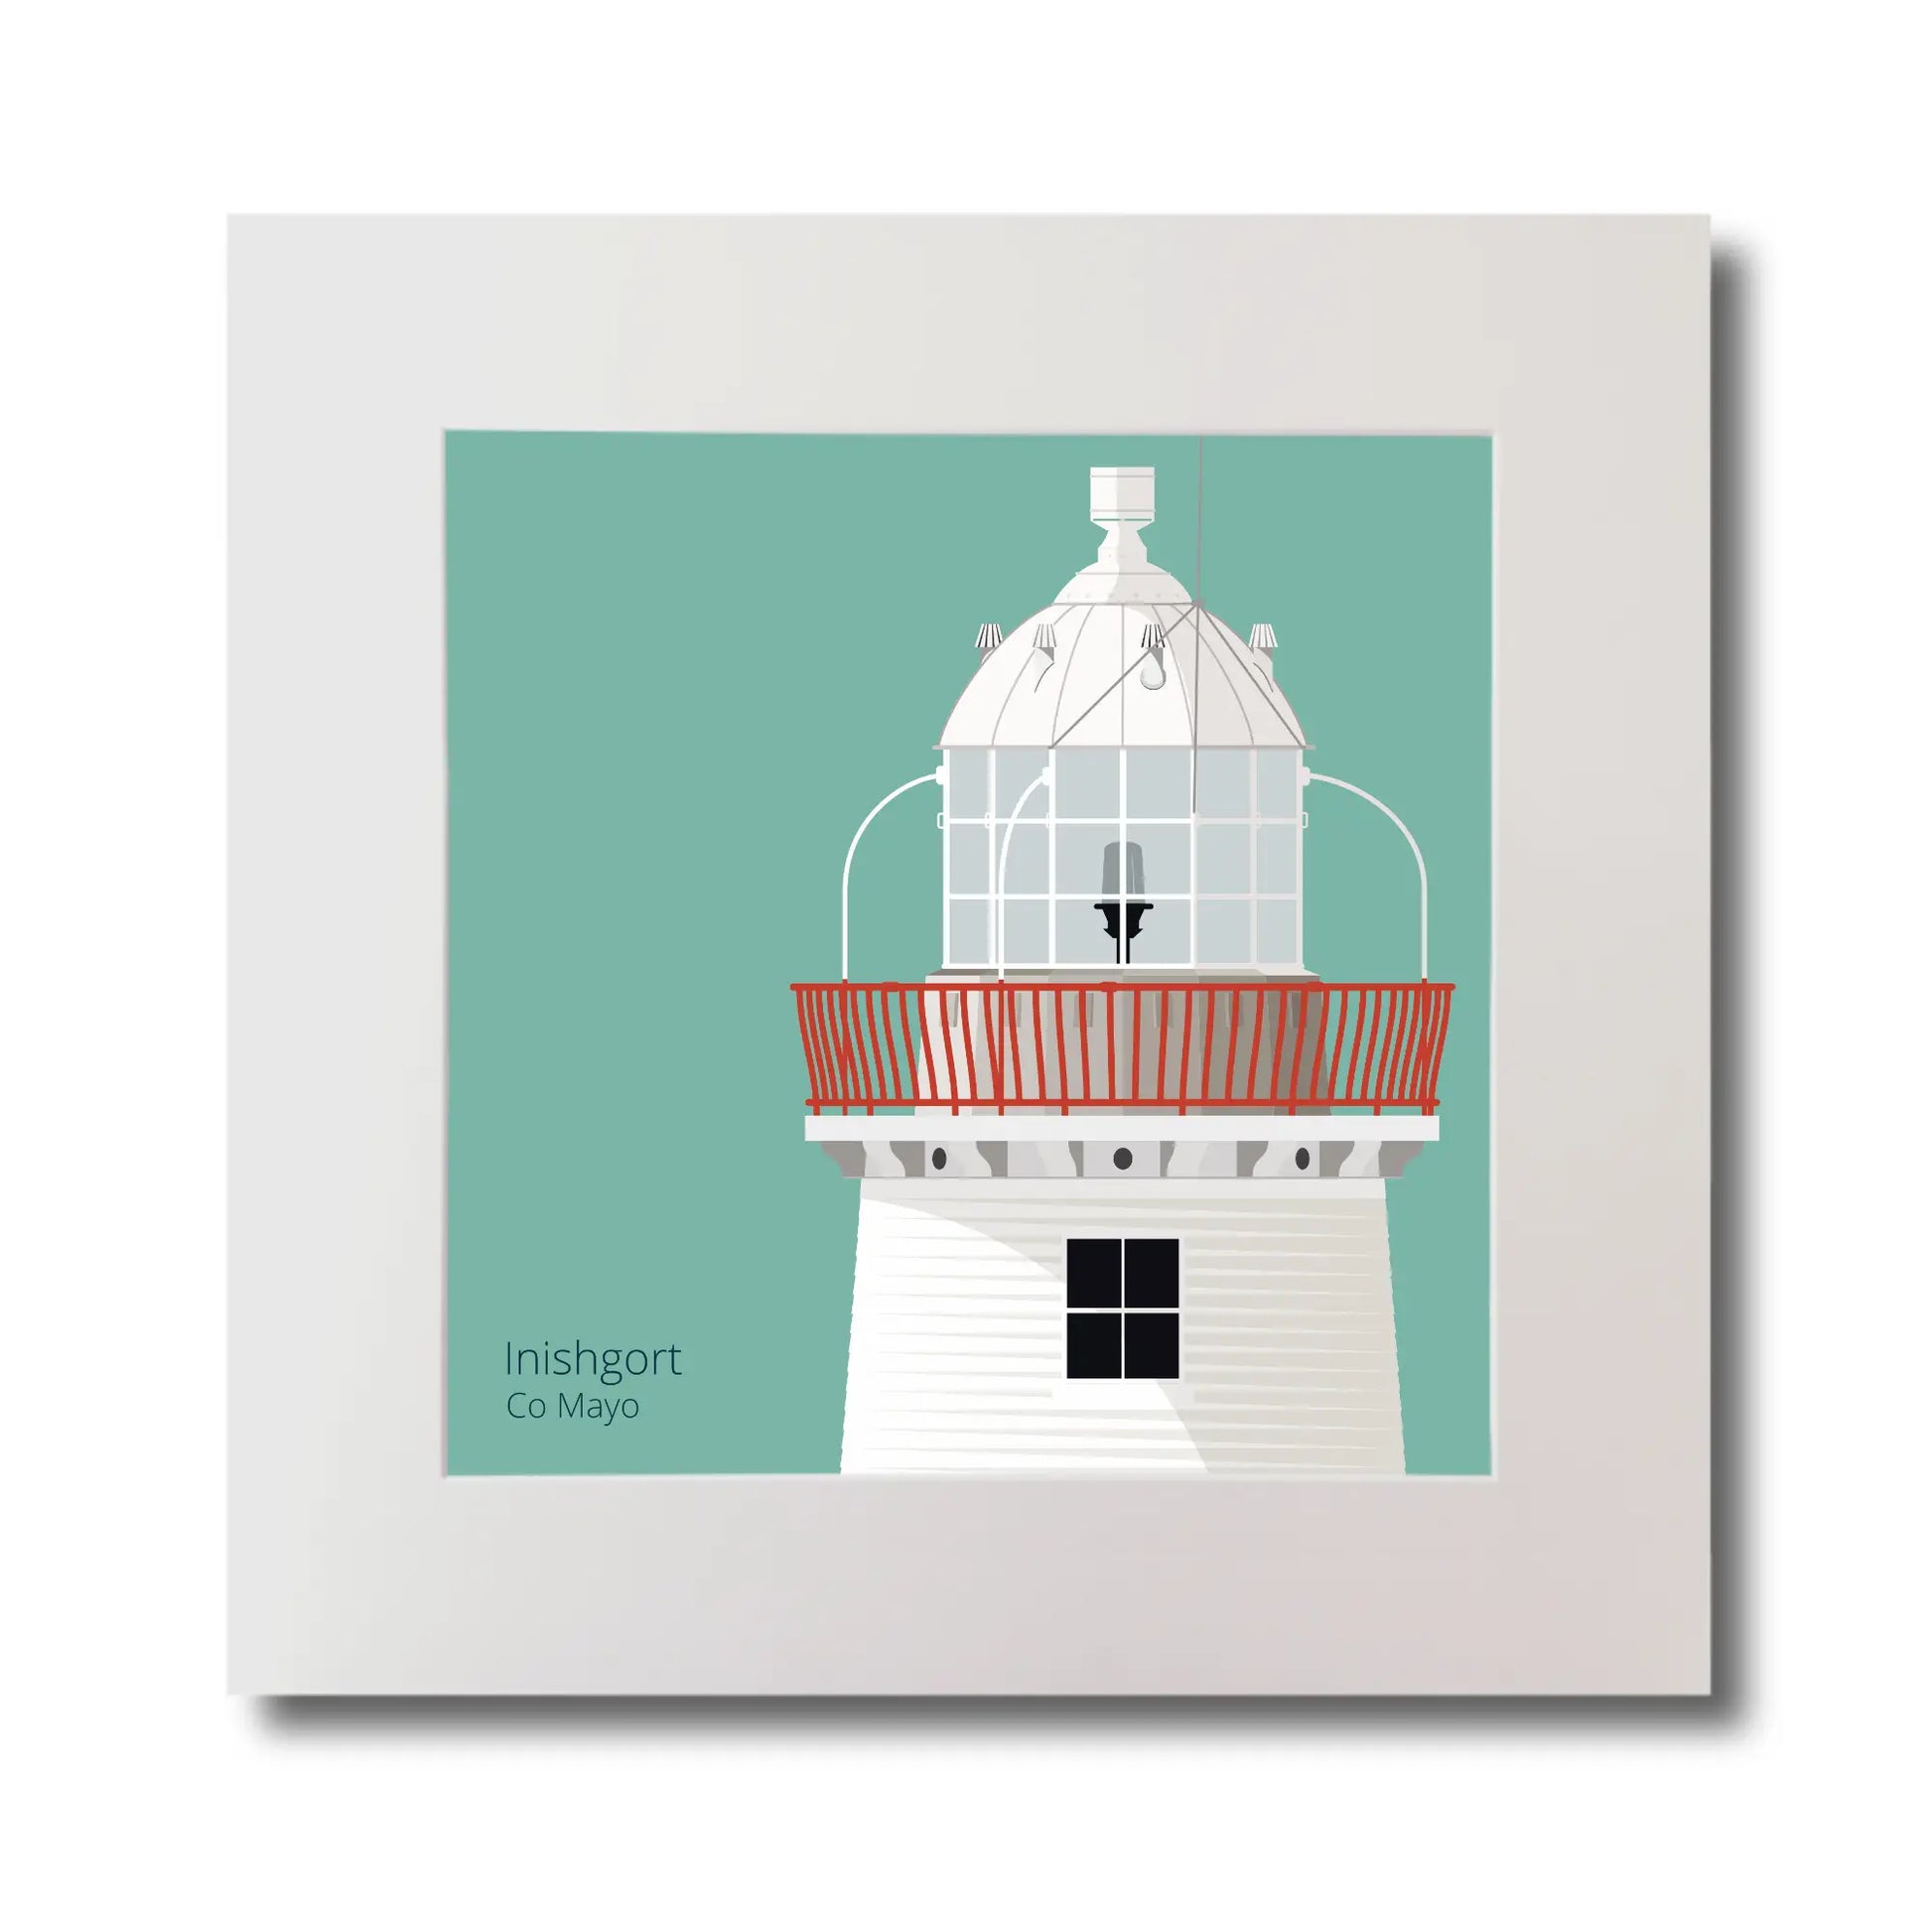 Illustration of Inishgort lighthouse on an ocean green background, mounted and measuring 30x30cm.